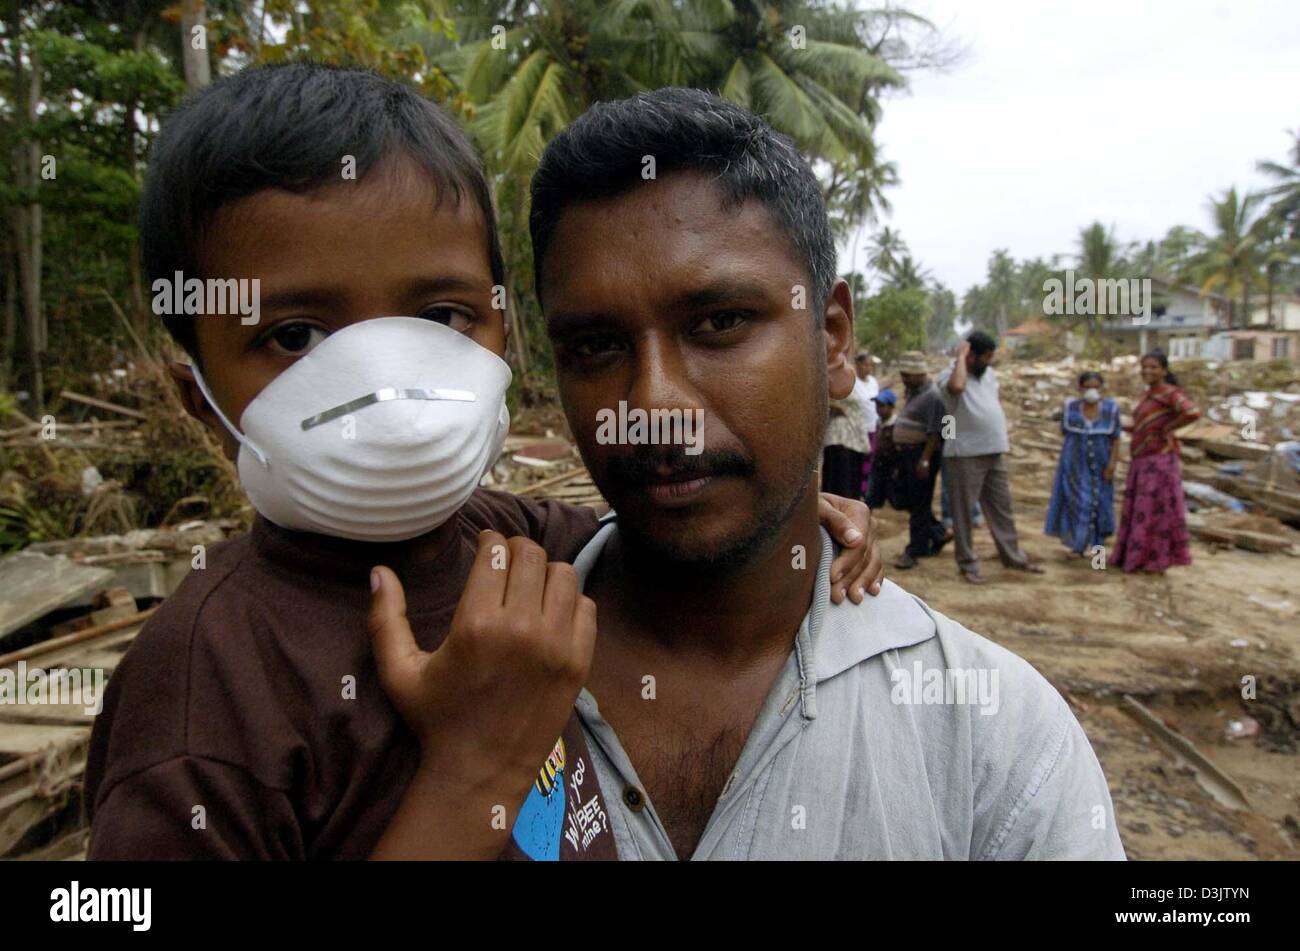 (dpa) - A father carries his son who is wearing a mask in fear of epidemics in the town of Dellewatha near the city of Galle, Sri Lanka, 2 January 2005. Hundreds of thousands of people living in the coastal areas of Sri Lanka lost their homes and around 30,000 people were killed by a devastating tsunami caused by a seaquake on 26 December 2004. Stock Photo